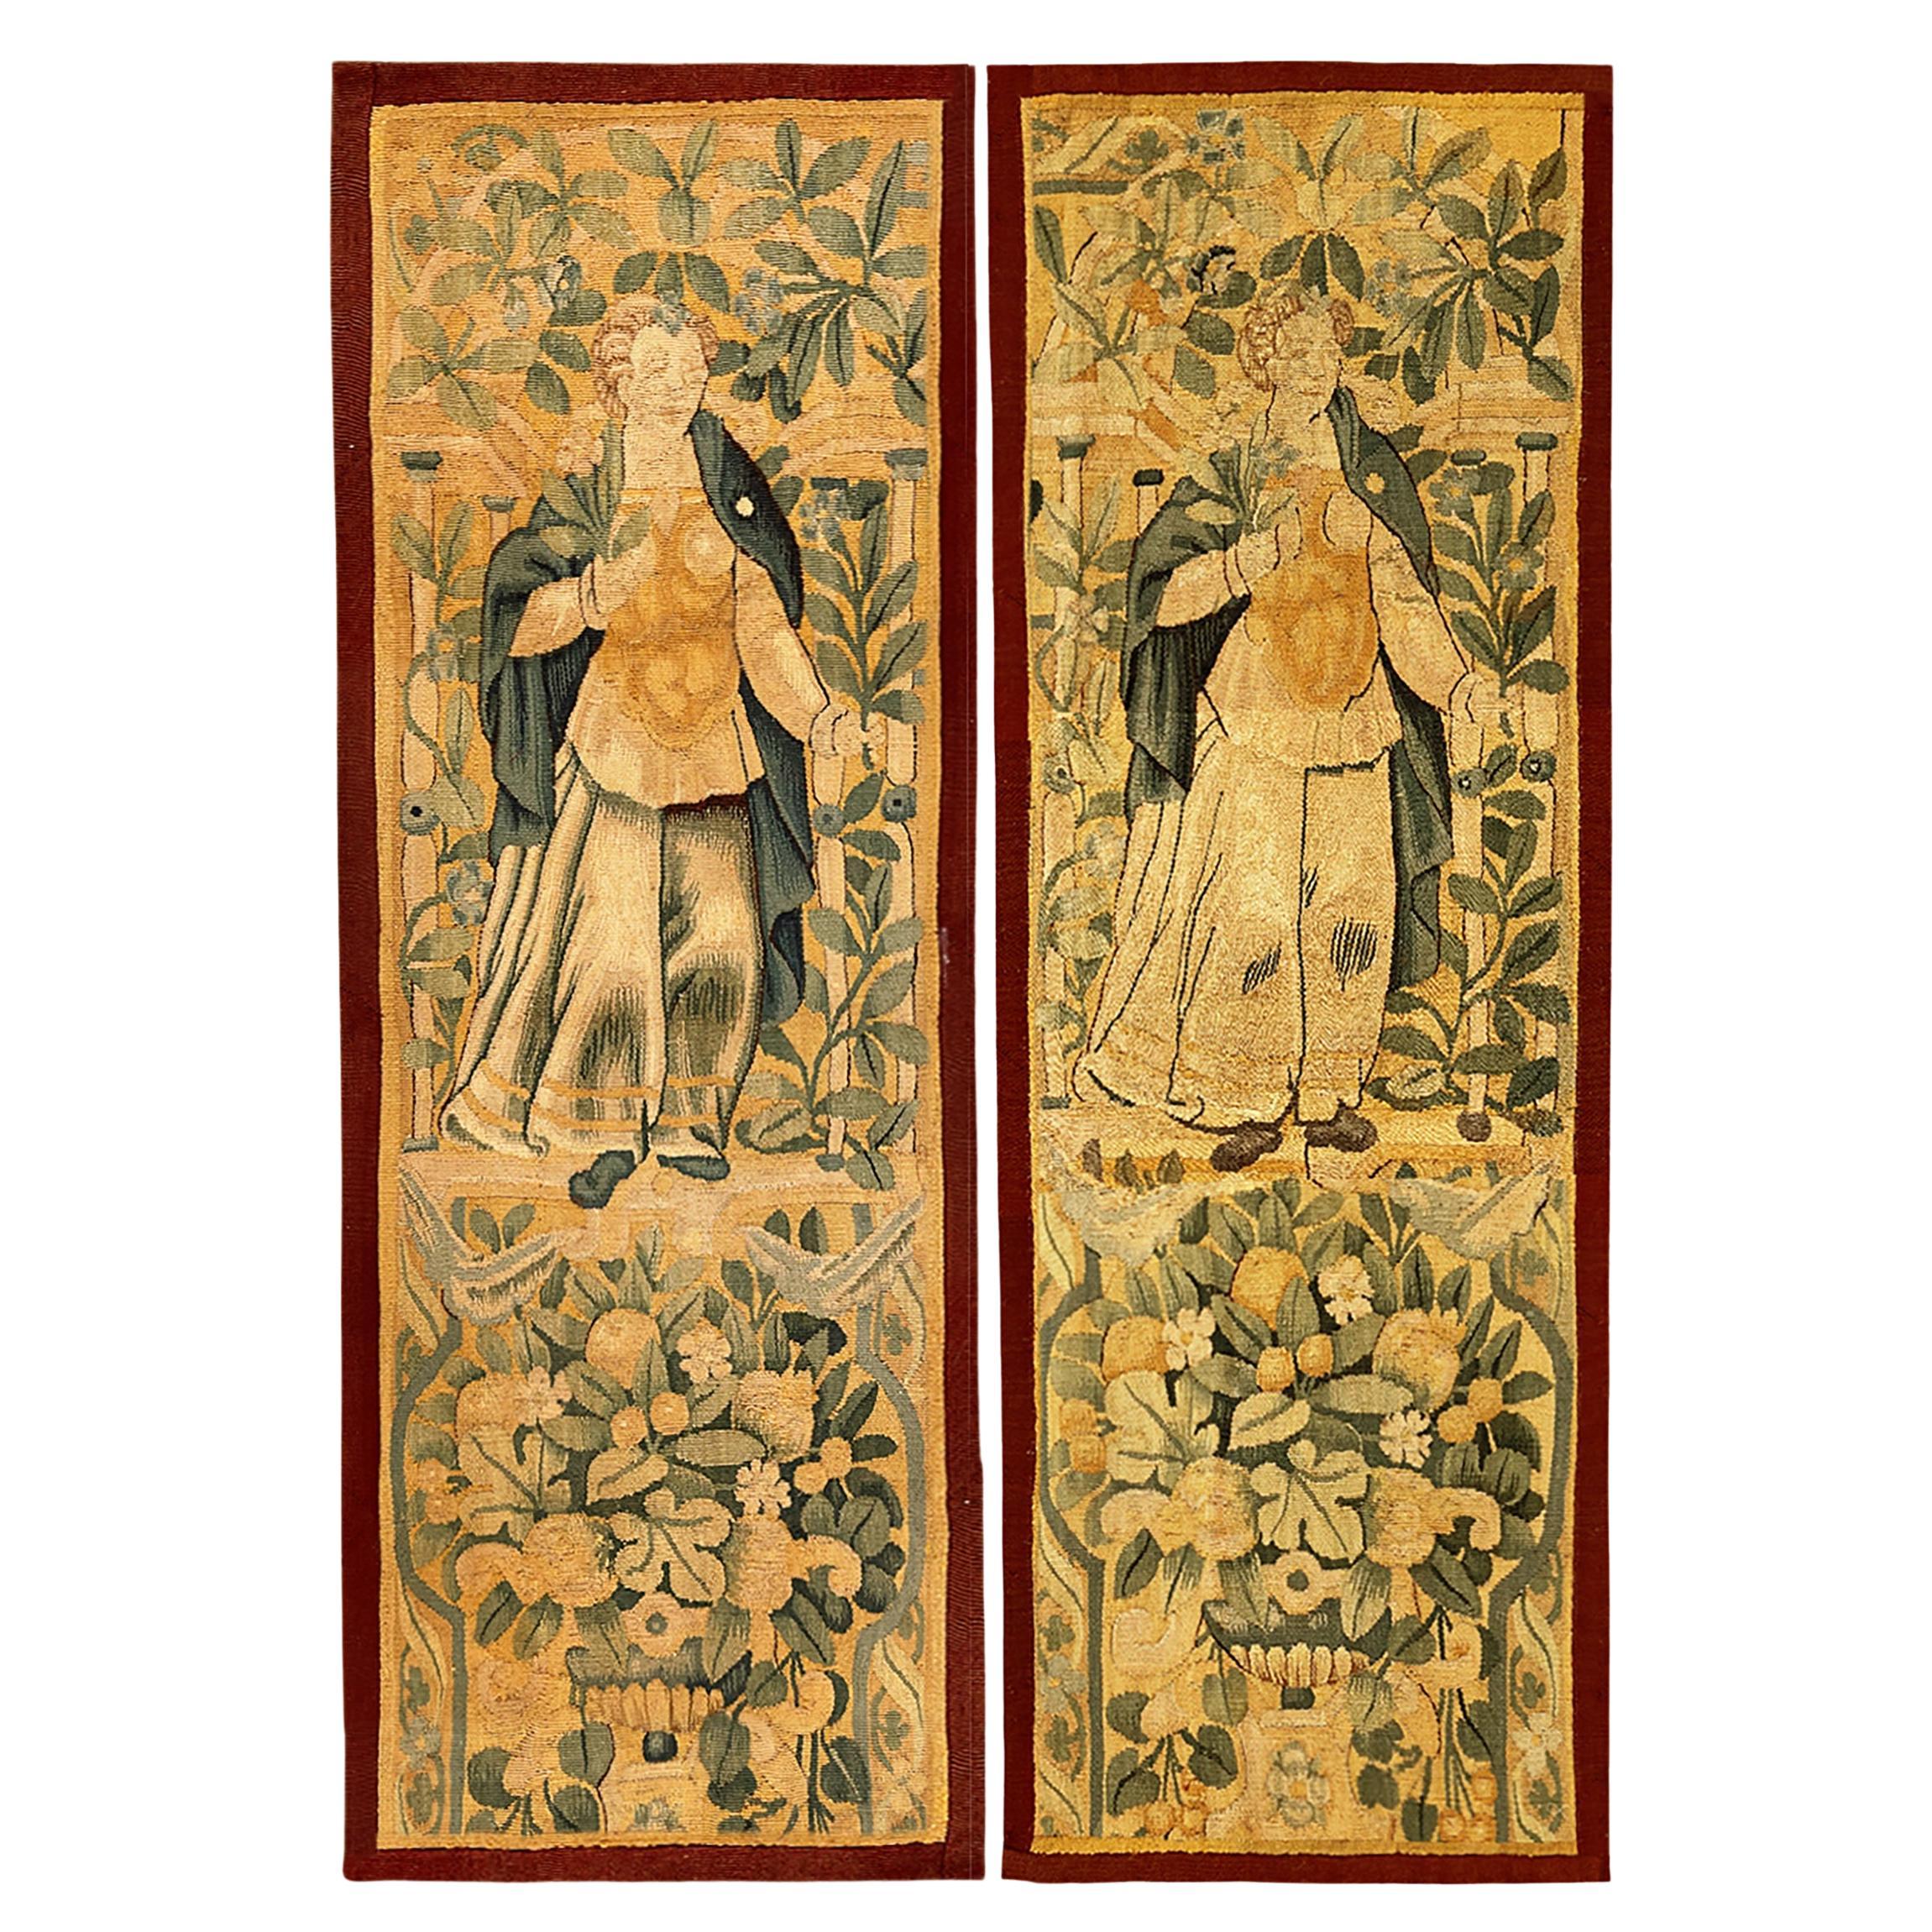 Pair of 17th Century Flemish Tapestry Panels w/ Female Figures & Floral Reserves